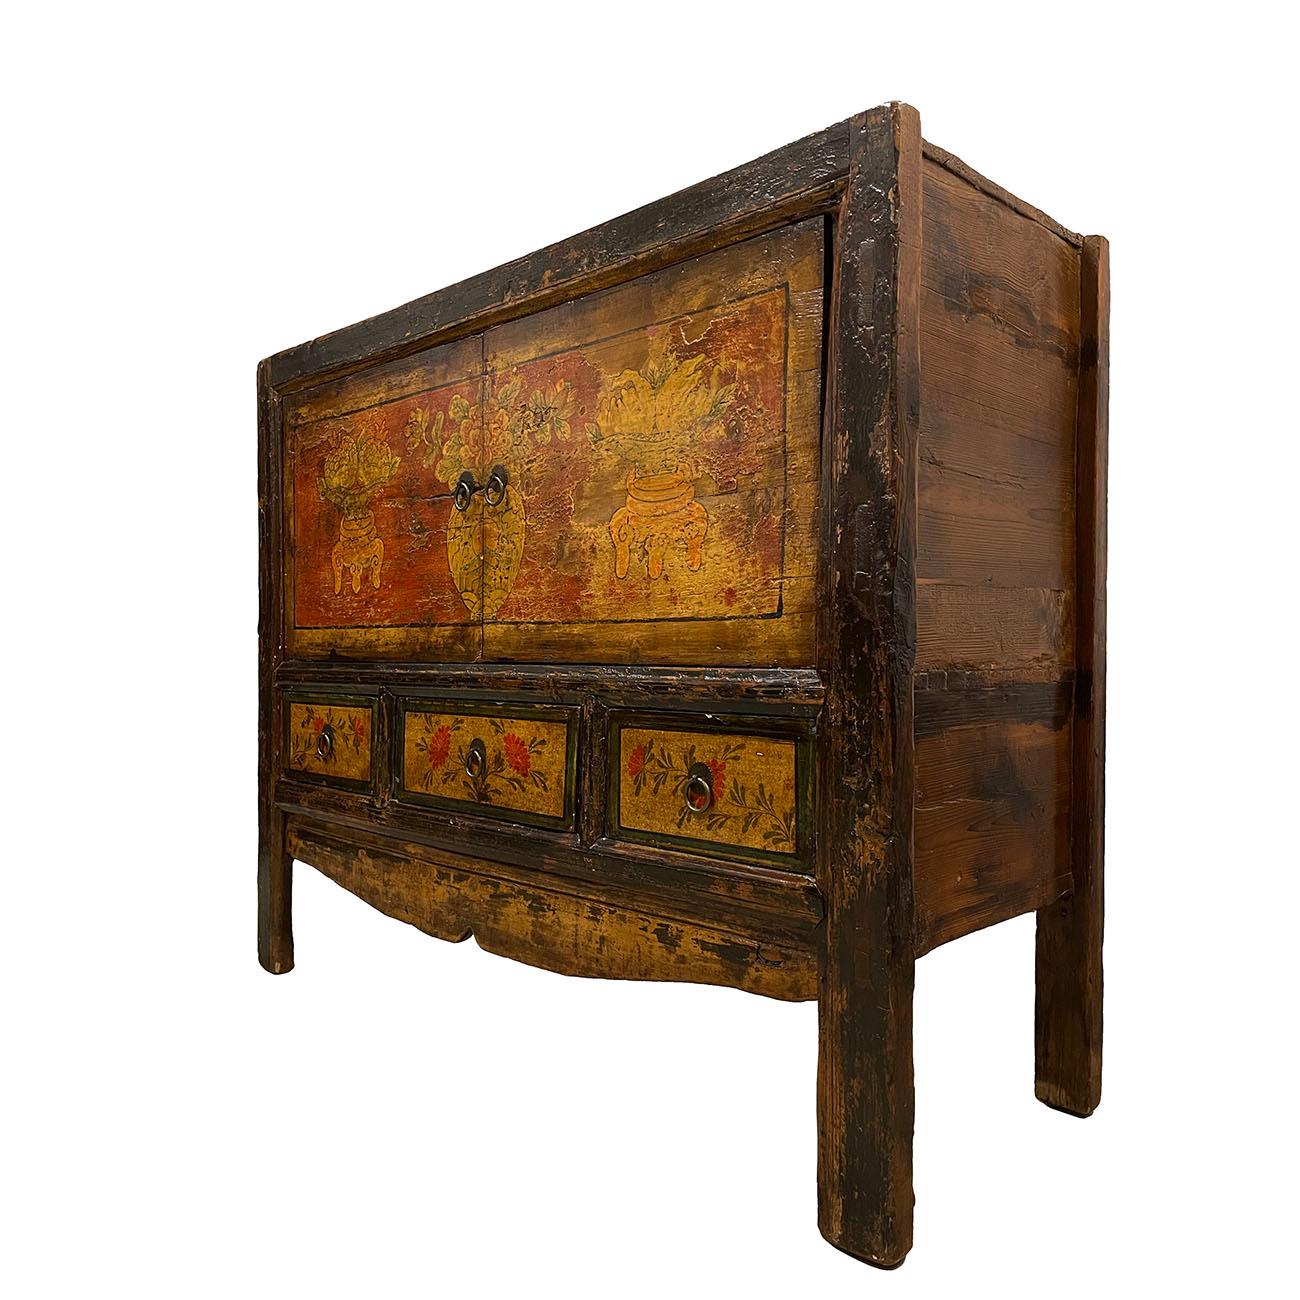 Size: 35.5in H x 43.5in W x 16in D
Drawer: side: 4in H x 9in W x 11in D
             center: 4in H x 13in W x 11in D
Door opening: 15in H x 33in W
Origin: Mongolia, China
Circa: 1850 - 1900
Material: Wood
Condition: Original finished, solid wood